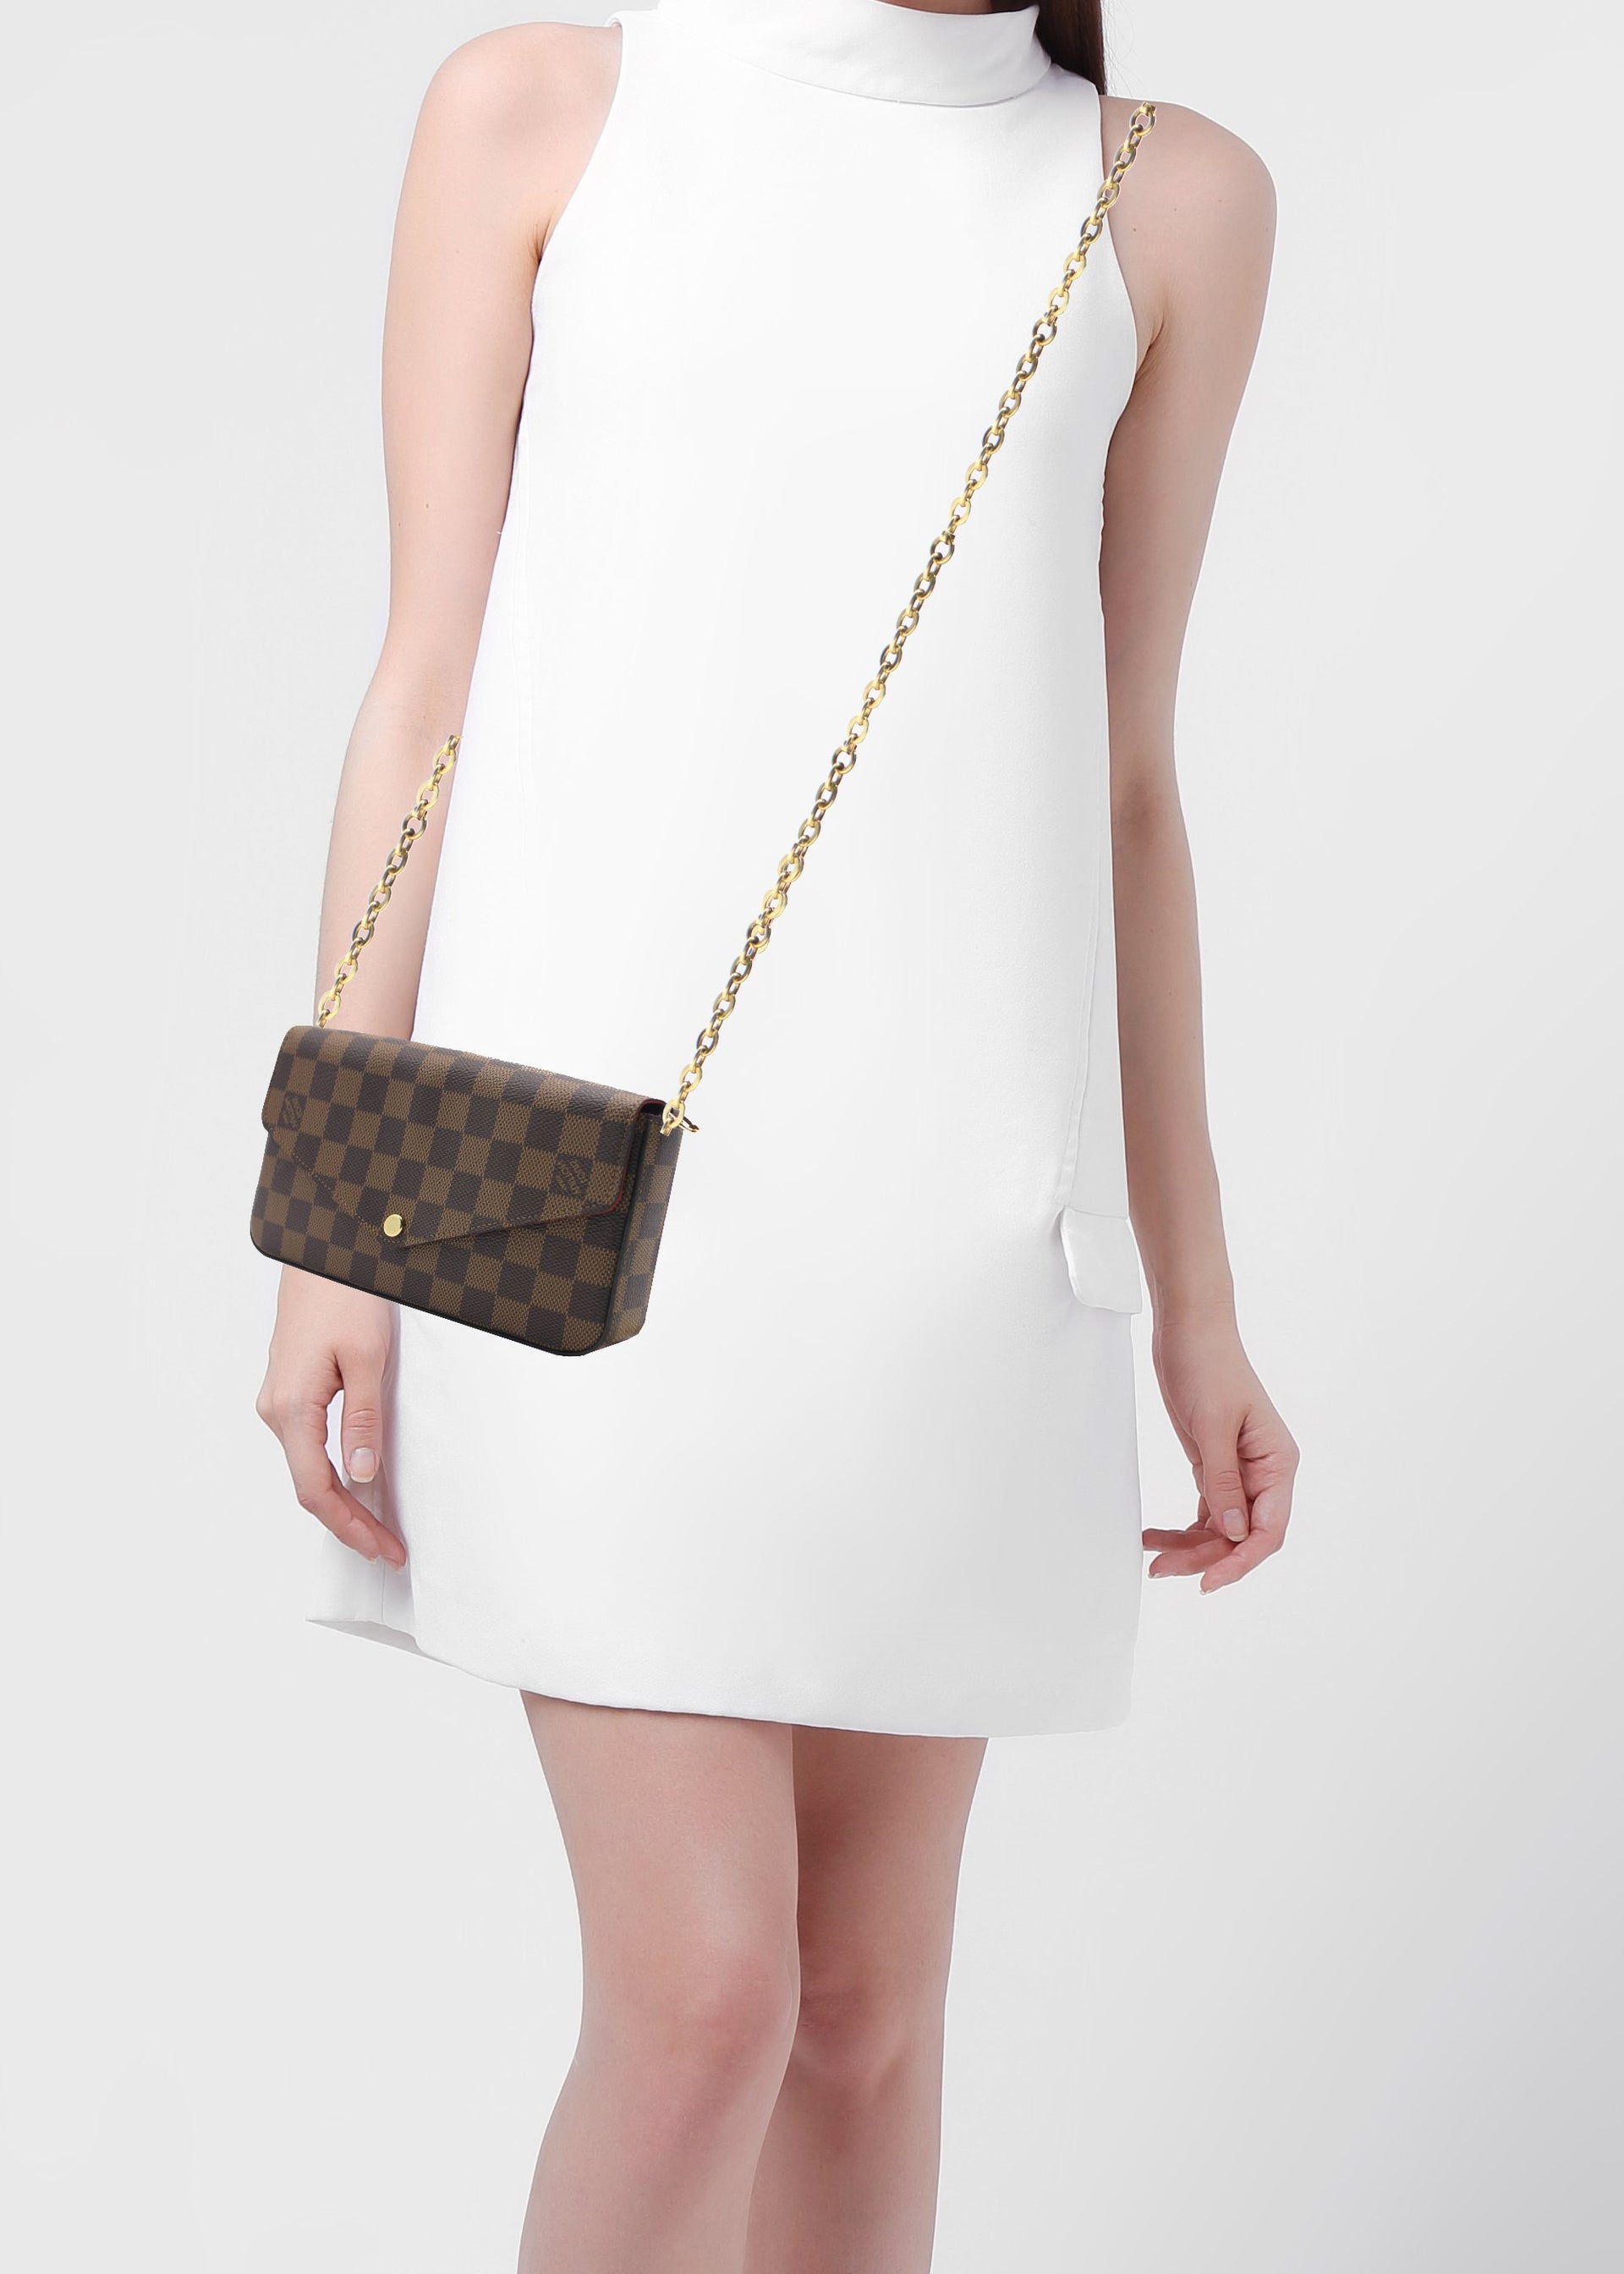 felicie pochette outfit